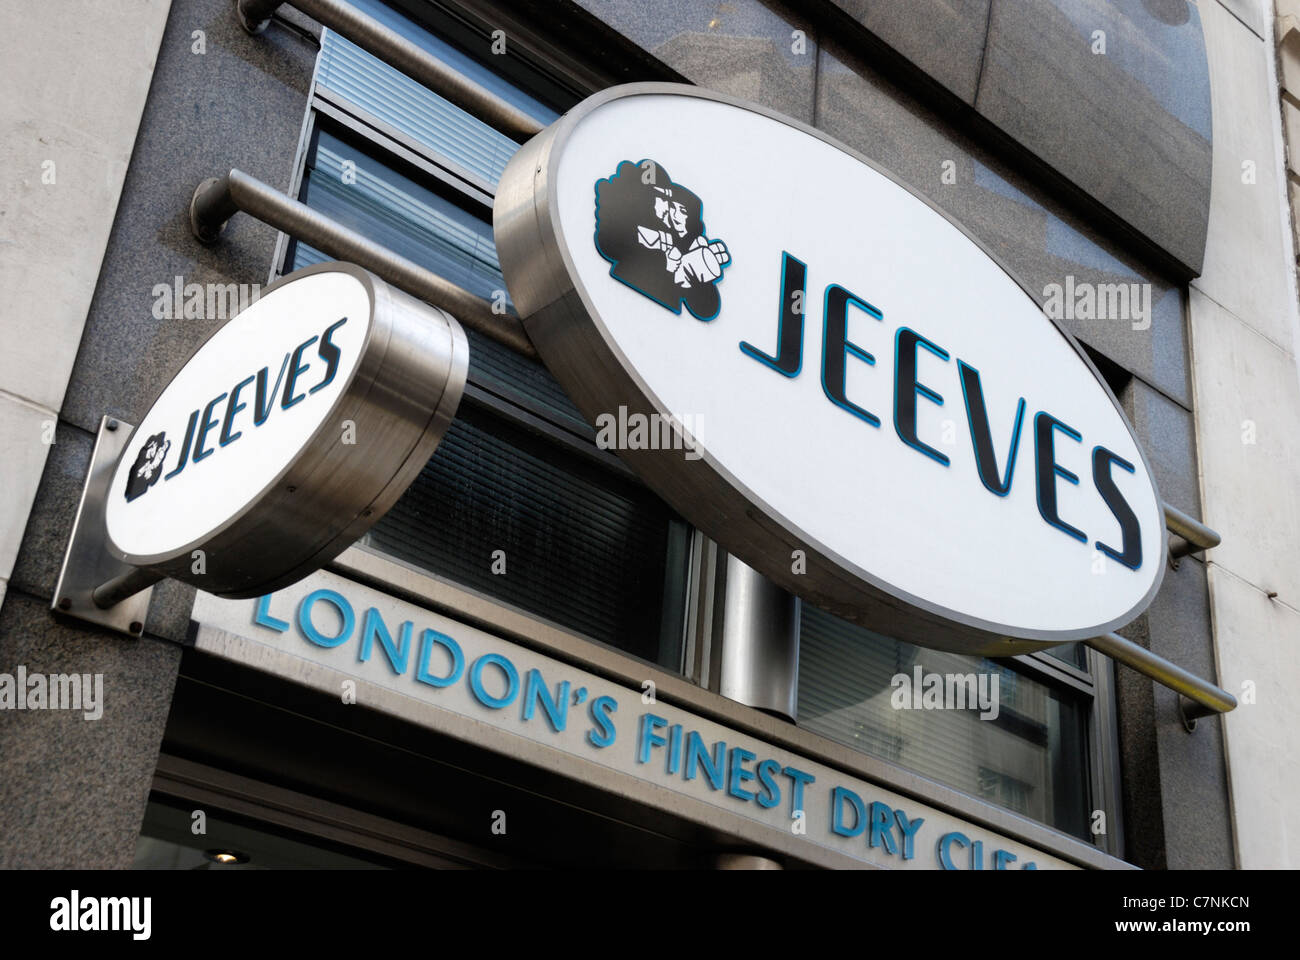 Jeeves Dry Cleaners inscrivez-logo, Londres, Angleterre Banque D'Images